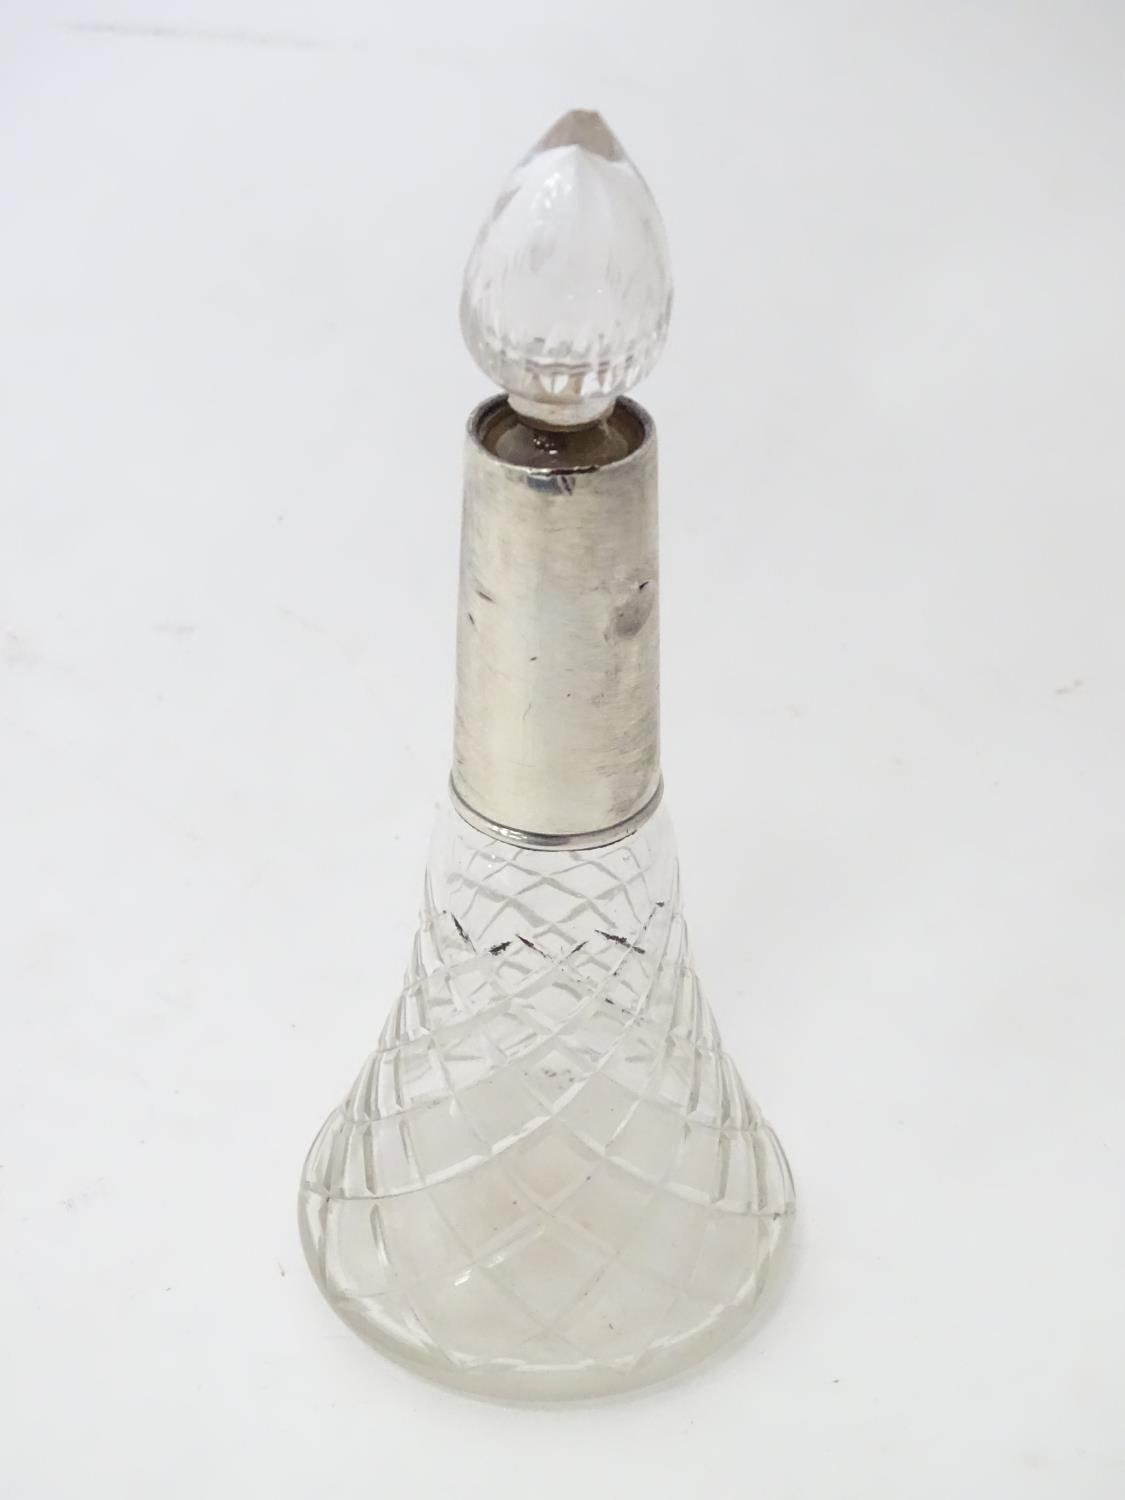 Victorian perfume / scent bottle Please Note - we do not make reference to the condition of lots - Image 5 of 5